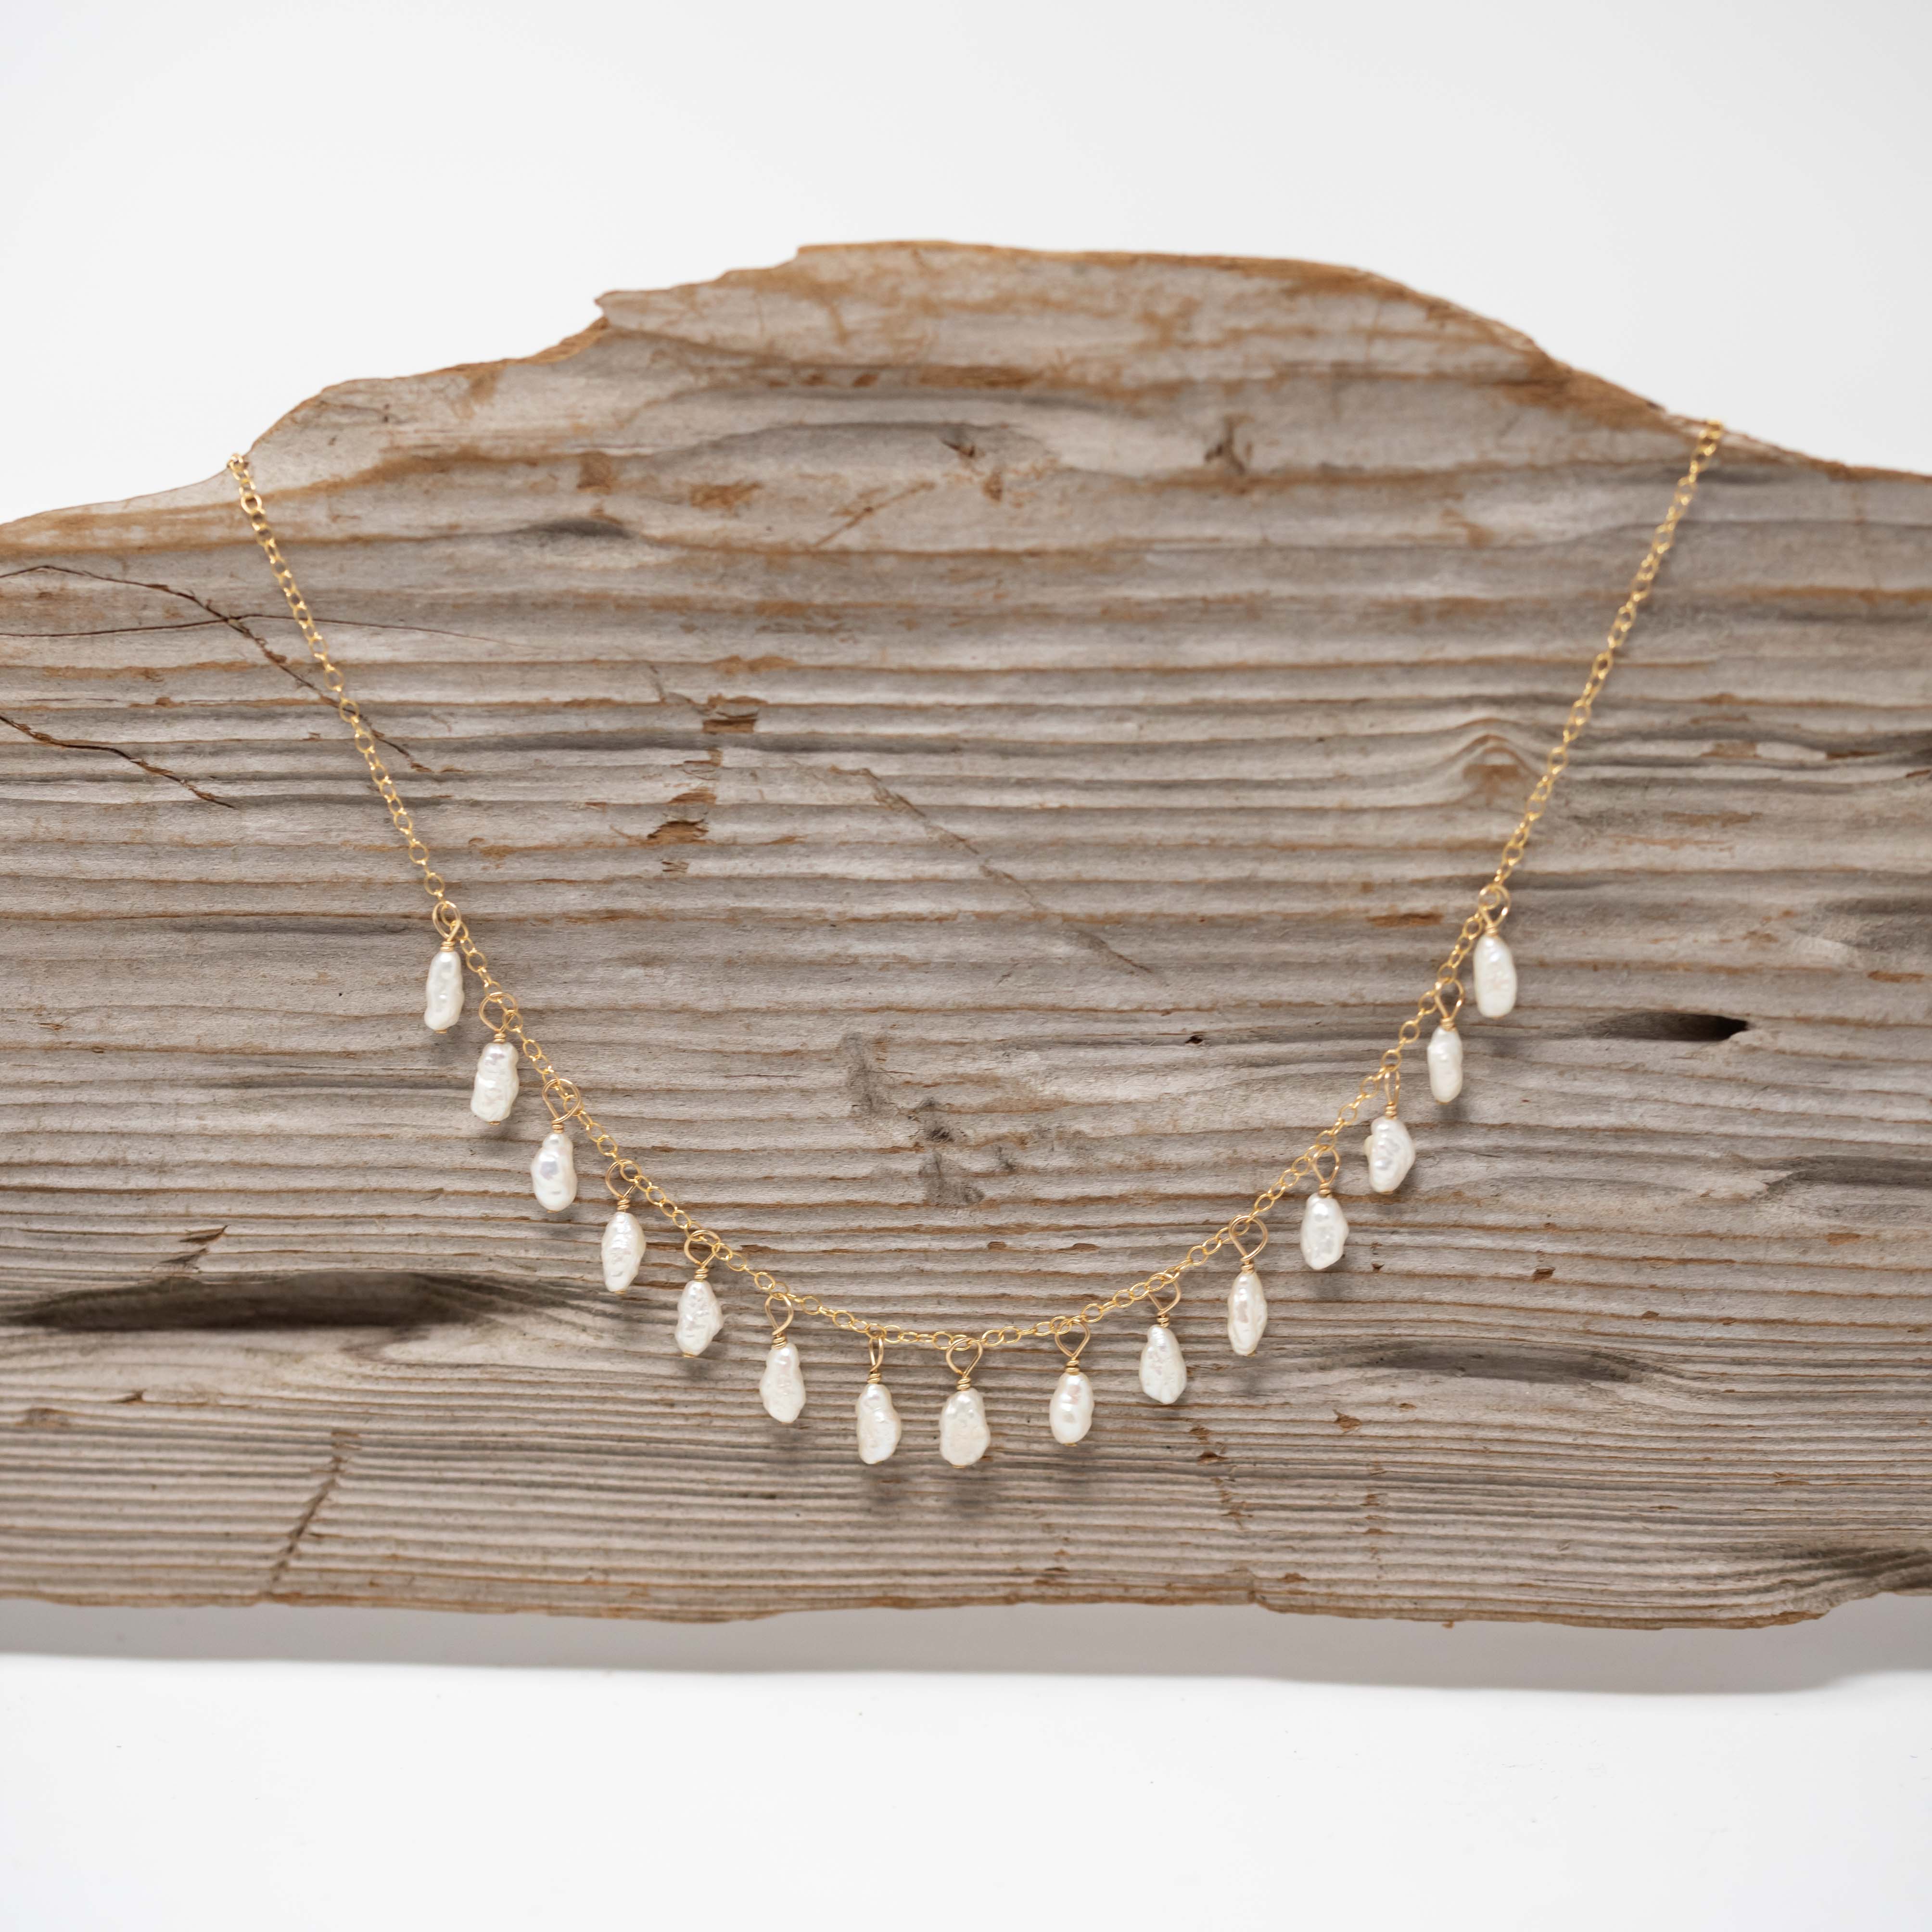 Gold chain with 15 pea sized freshwater pearls attached to it. 